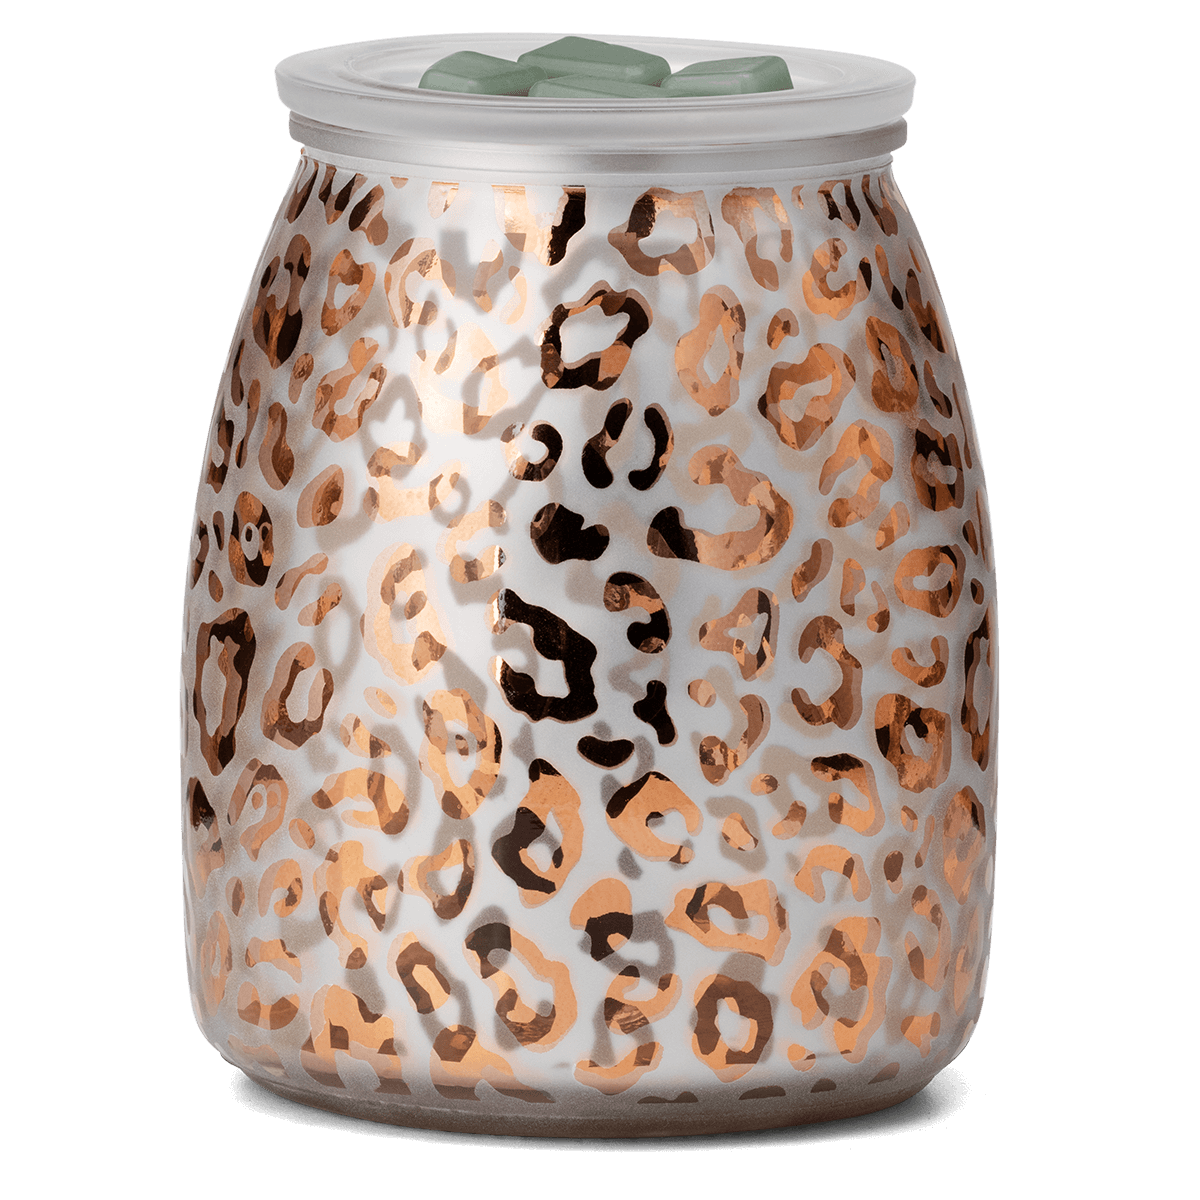 Savanna Scentsy Warmer switched off